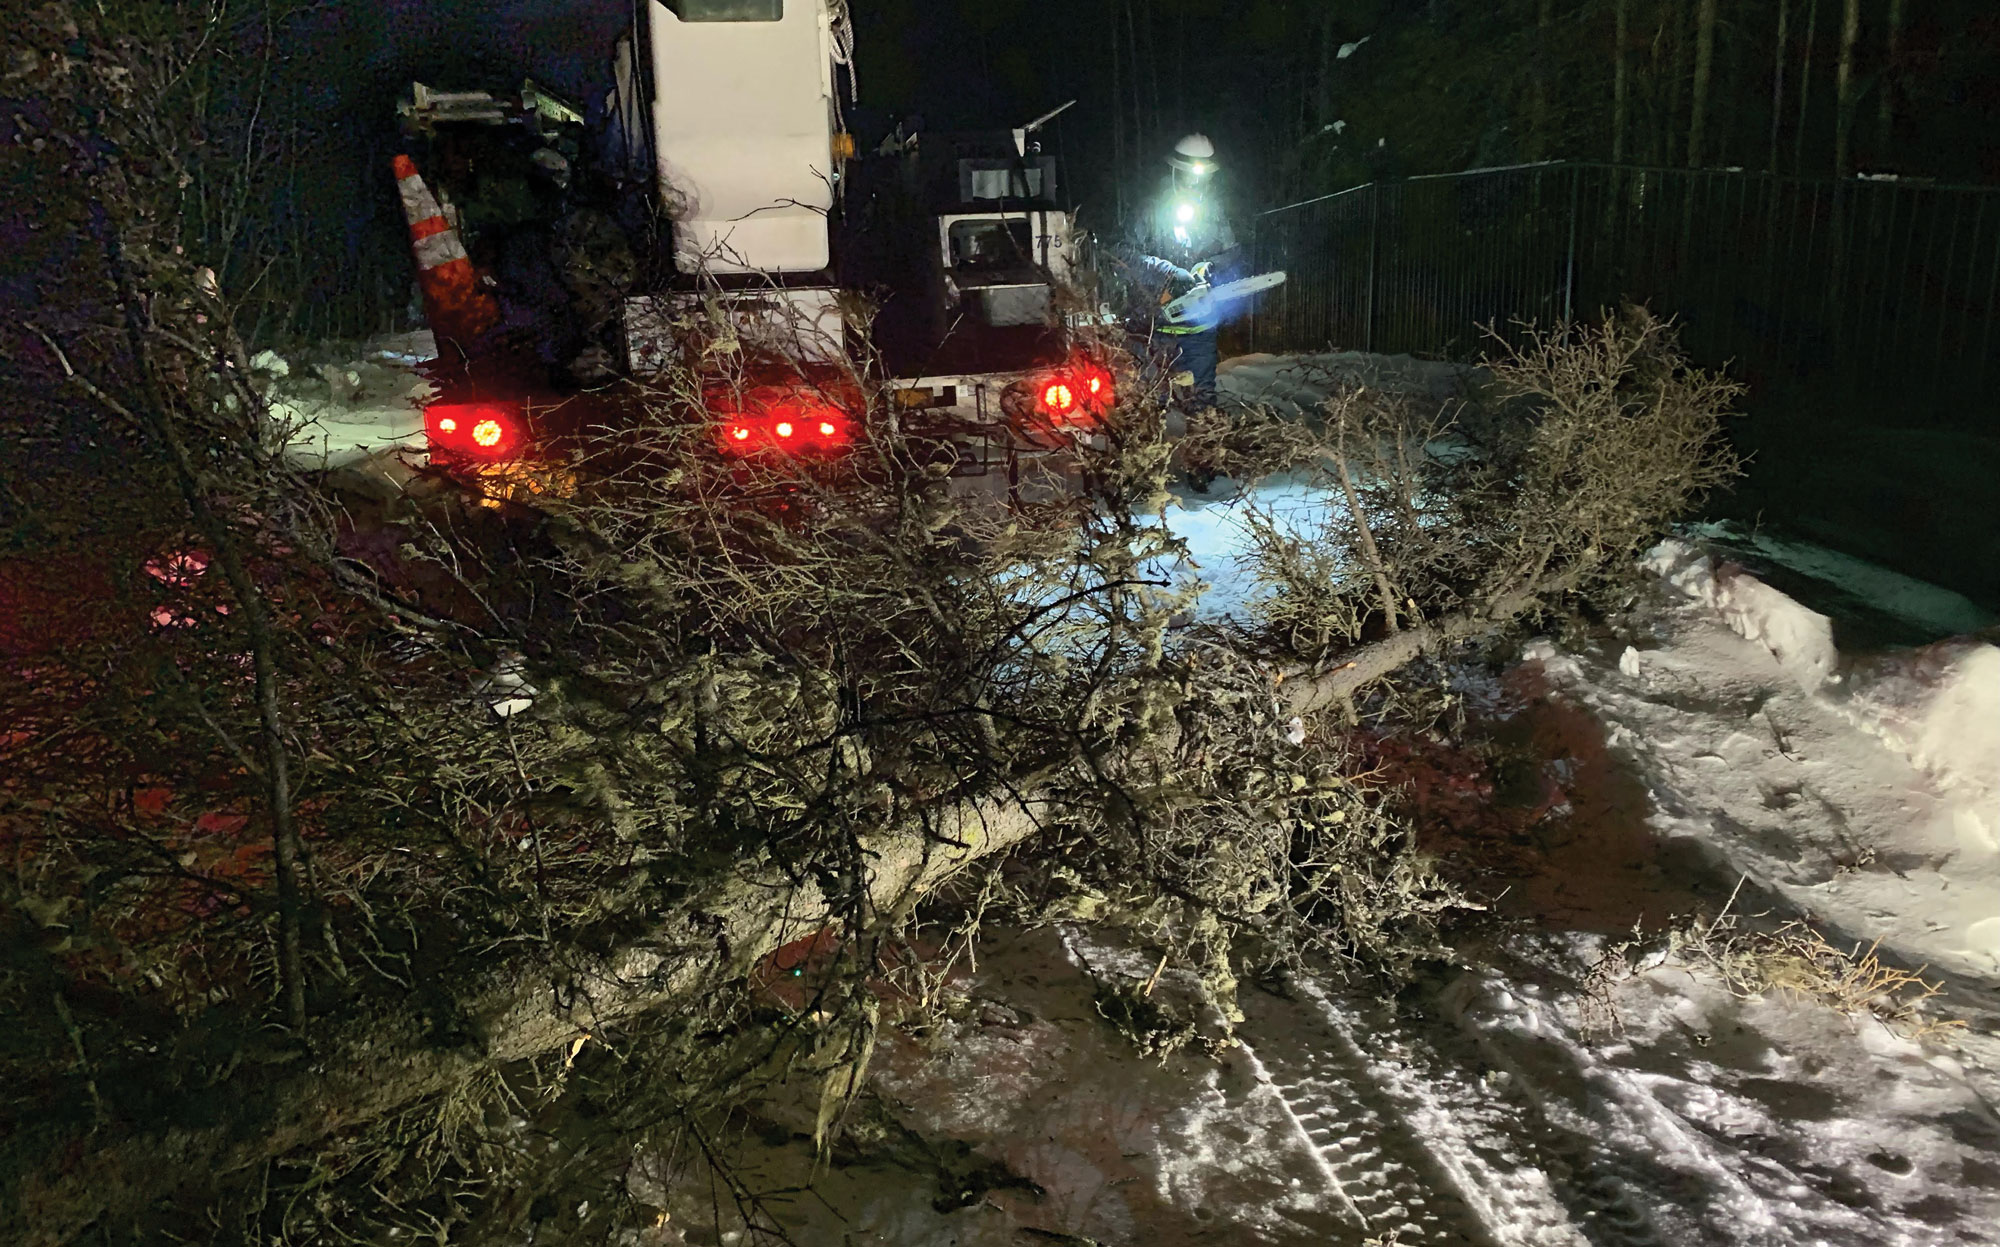 Though other parts of Alaska also experienced wind storms in January, the number of uprooted trees on power lines in the Mat-Su Valley far outnumbered those in other areas